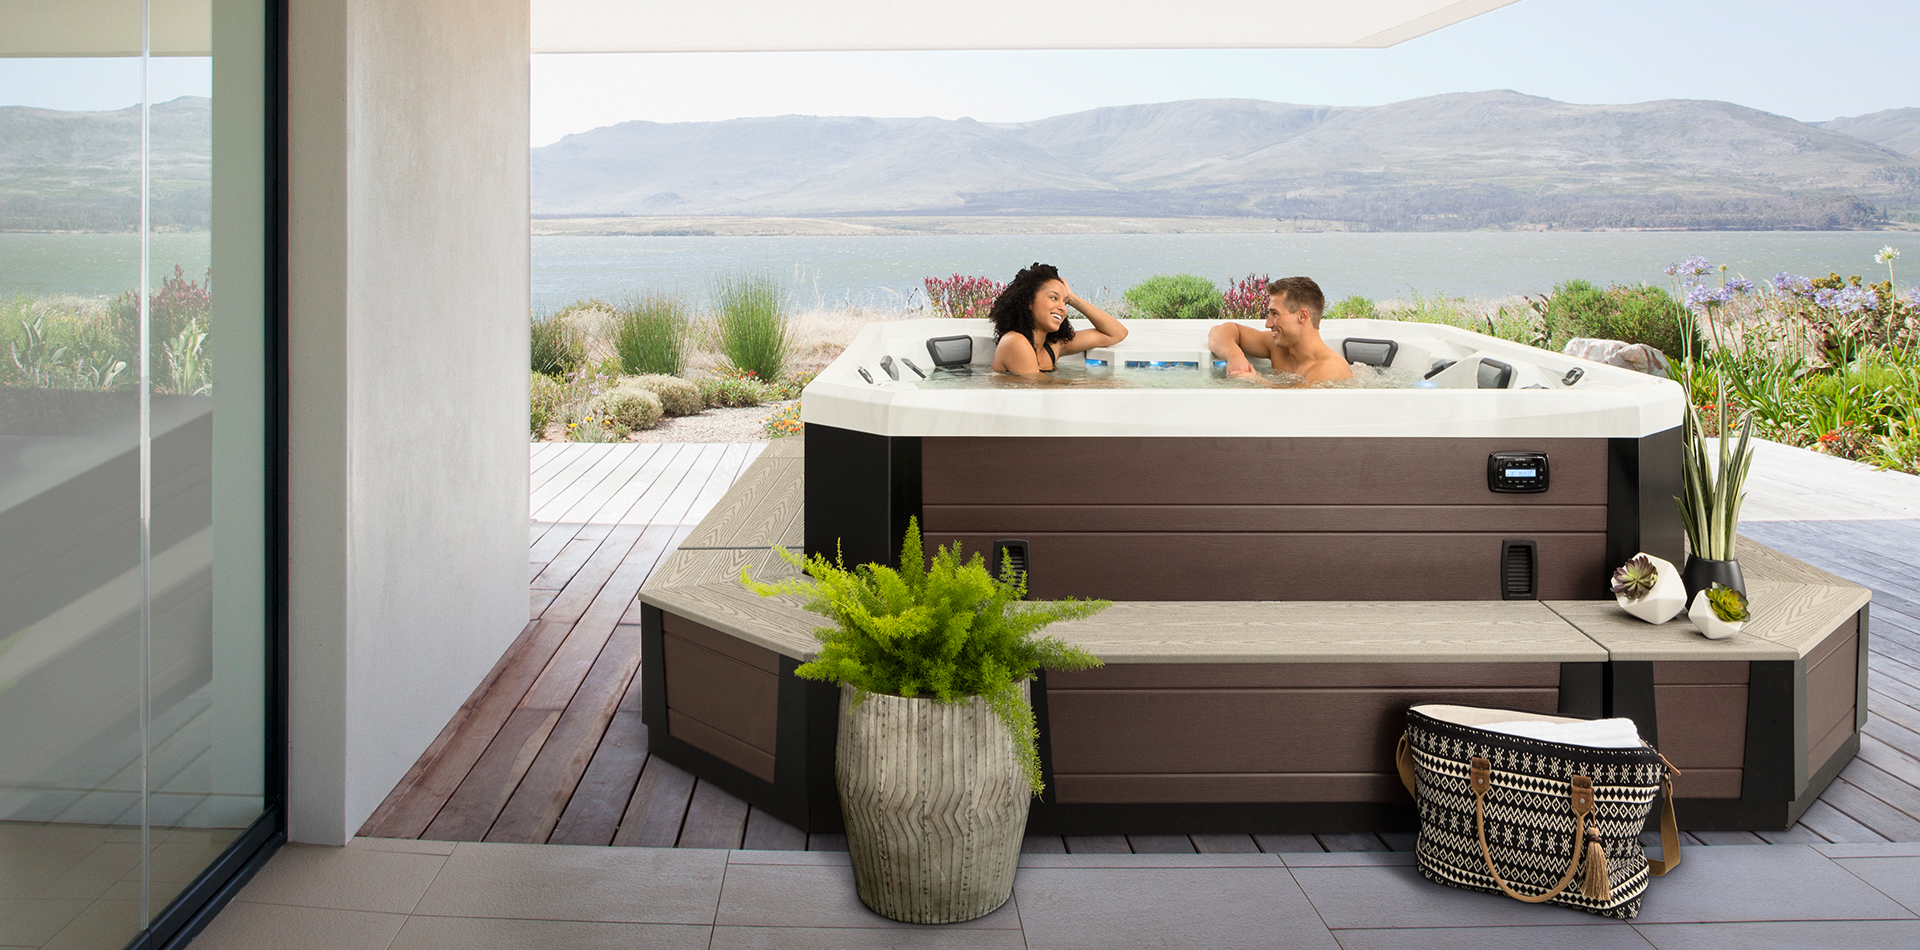 Horizontal Credentials delivery 8 person hot tubs for sale near me ...